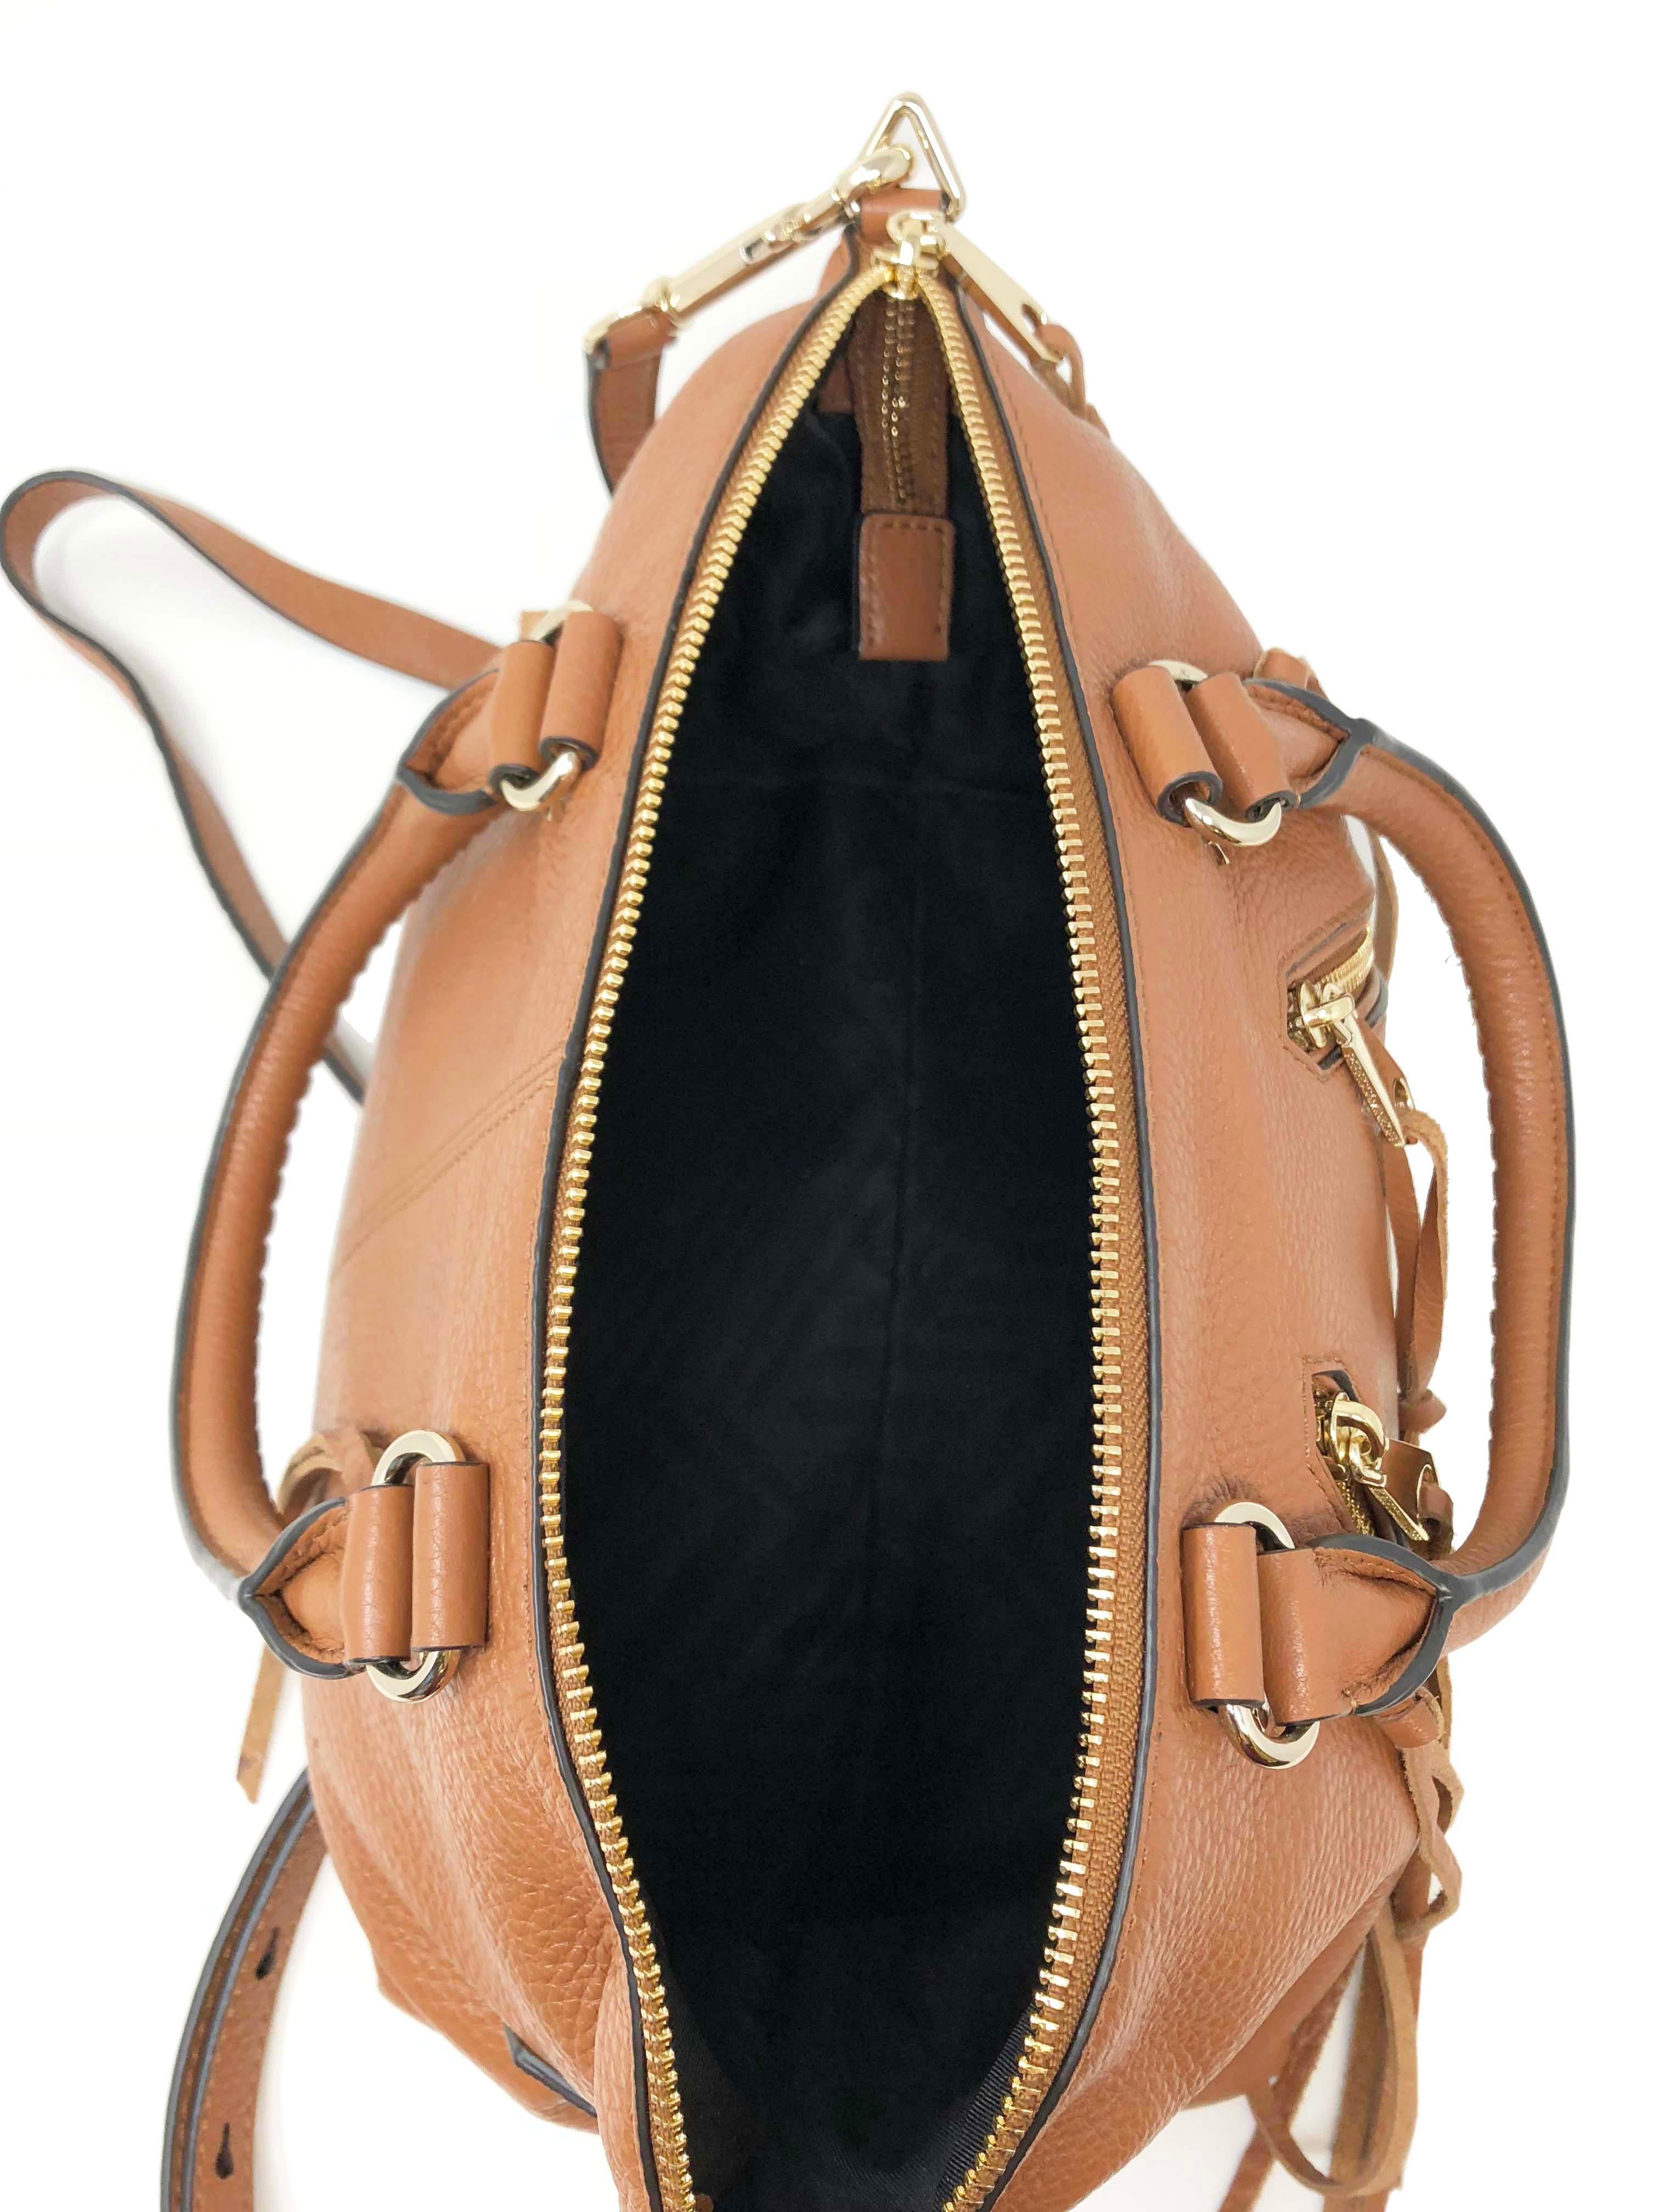 This is new with tags Rebecca Minkoff Moto HF16MOS26 Almond Leather Ladies Satchel Purse. It is crafted from soft pebble leather and finished with gold-tone hardware, this moto satchel is the ideal go-anywhere bag. The purse has 2 exterior zip